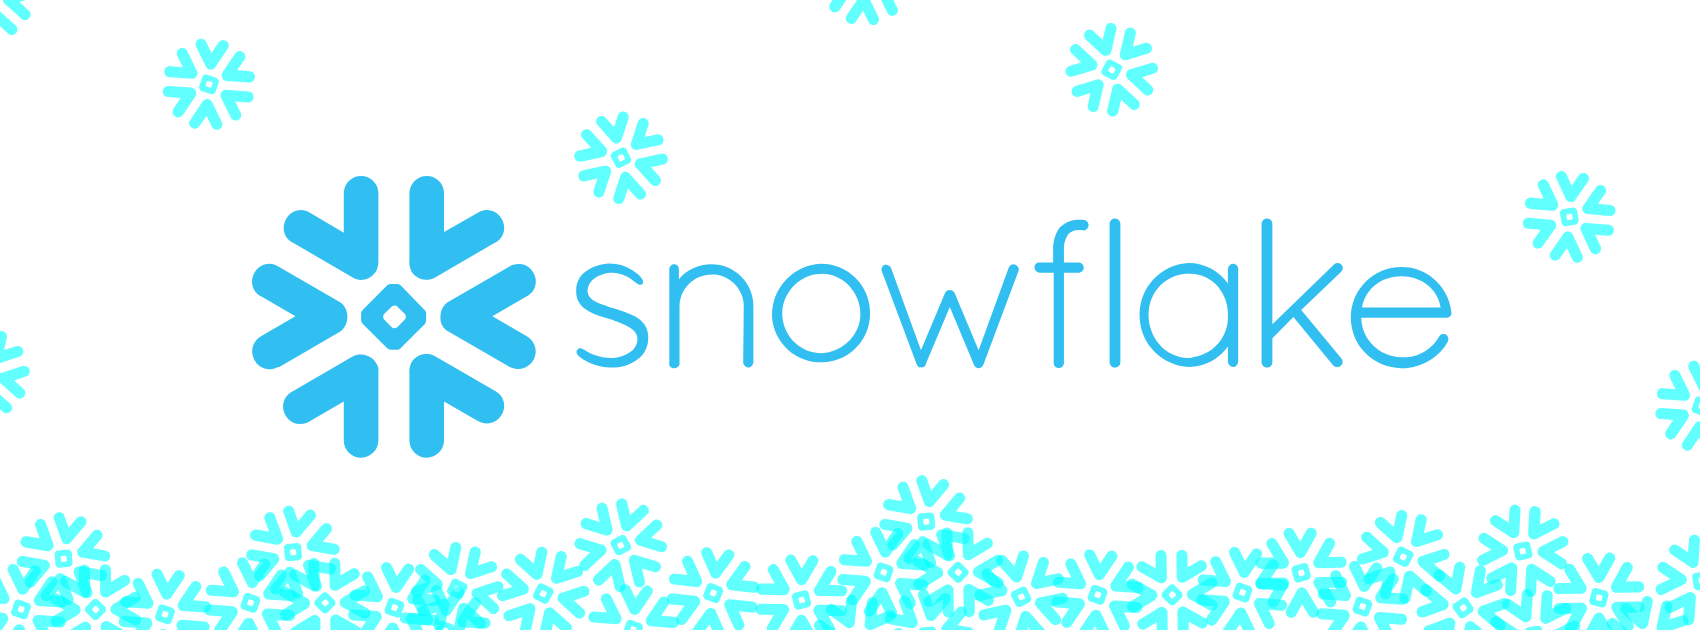 Snowflake: Causing an avalanche of data!